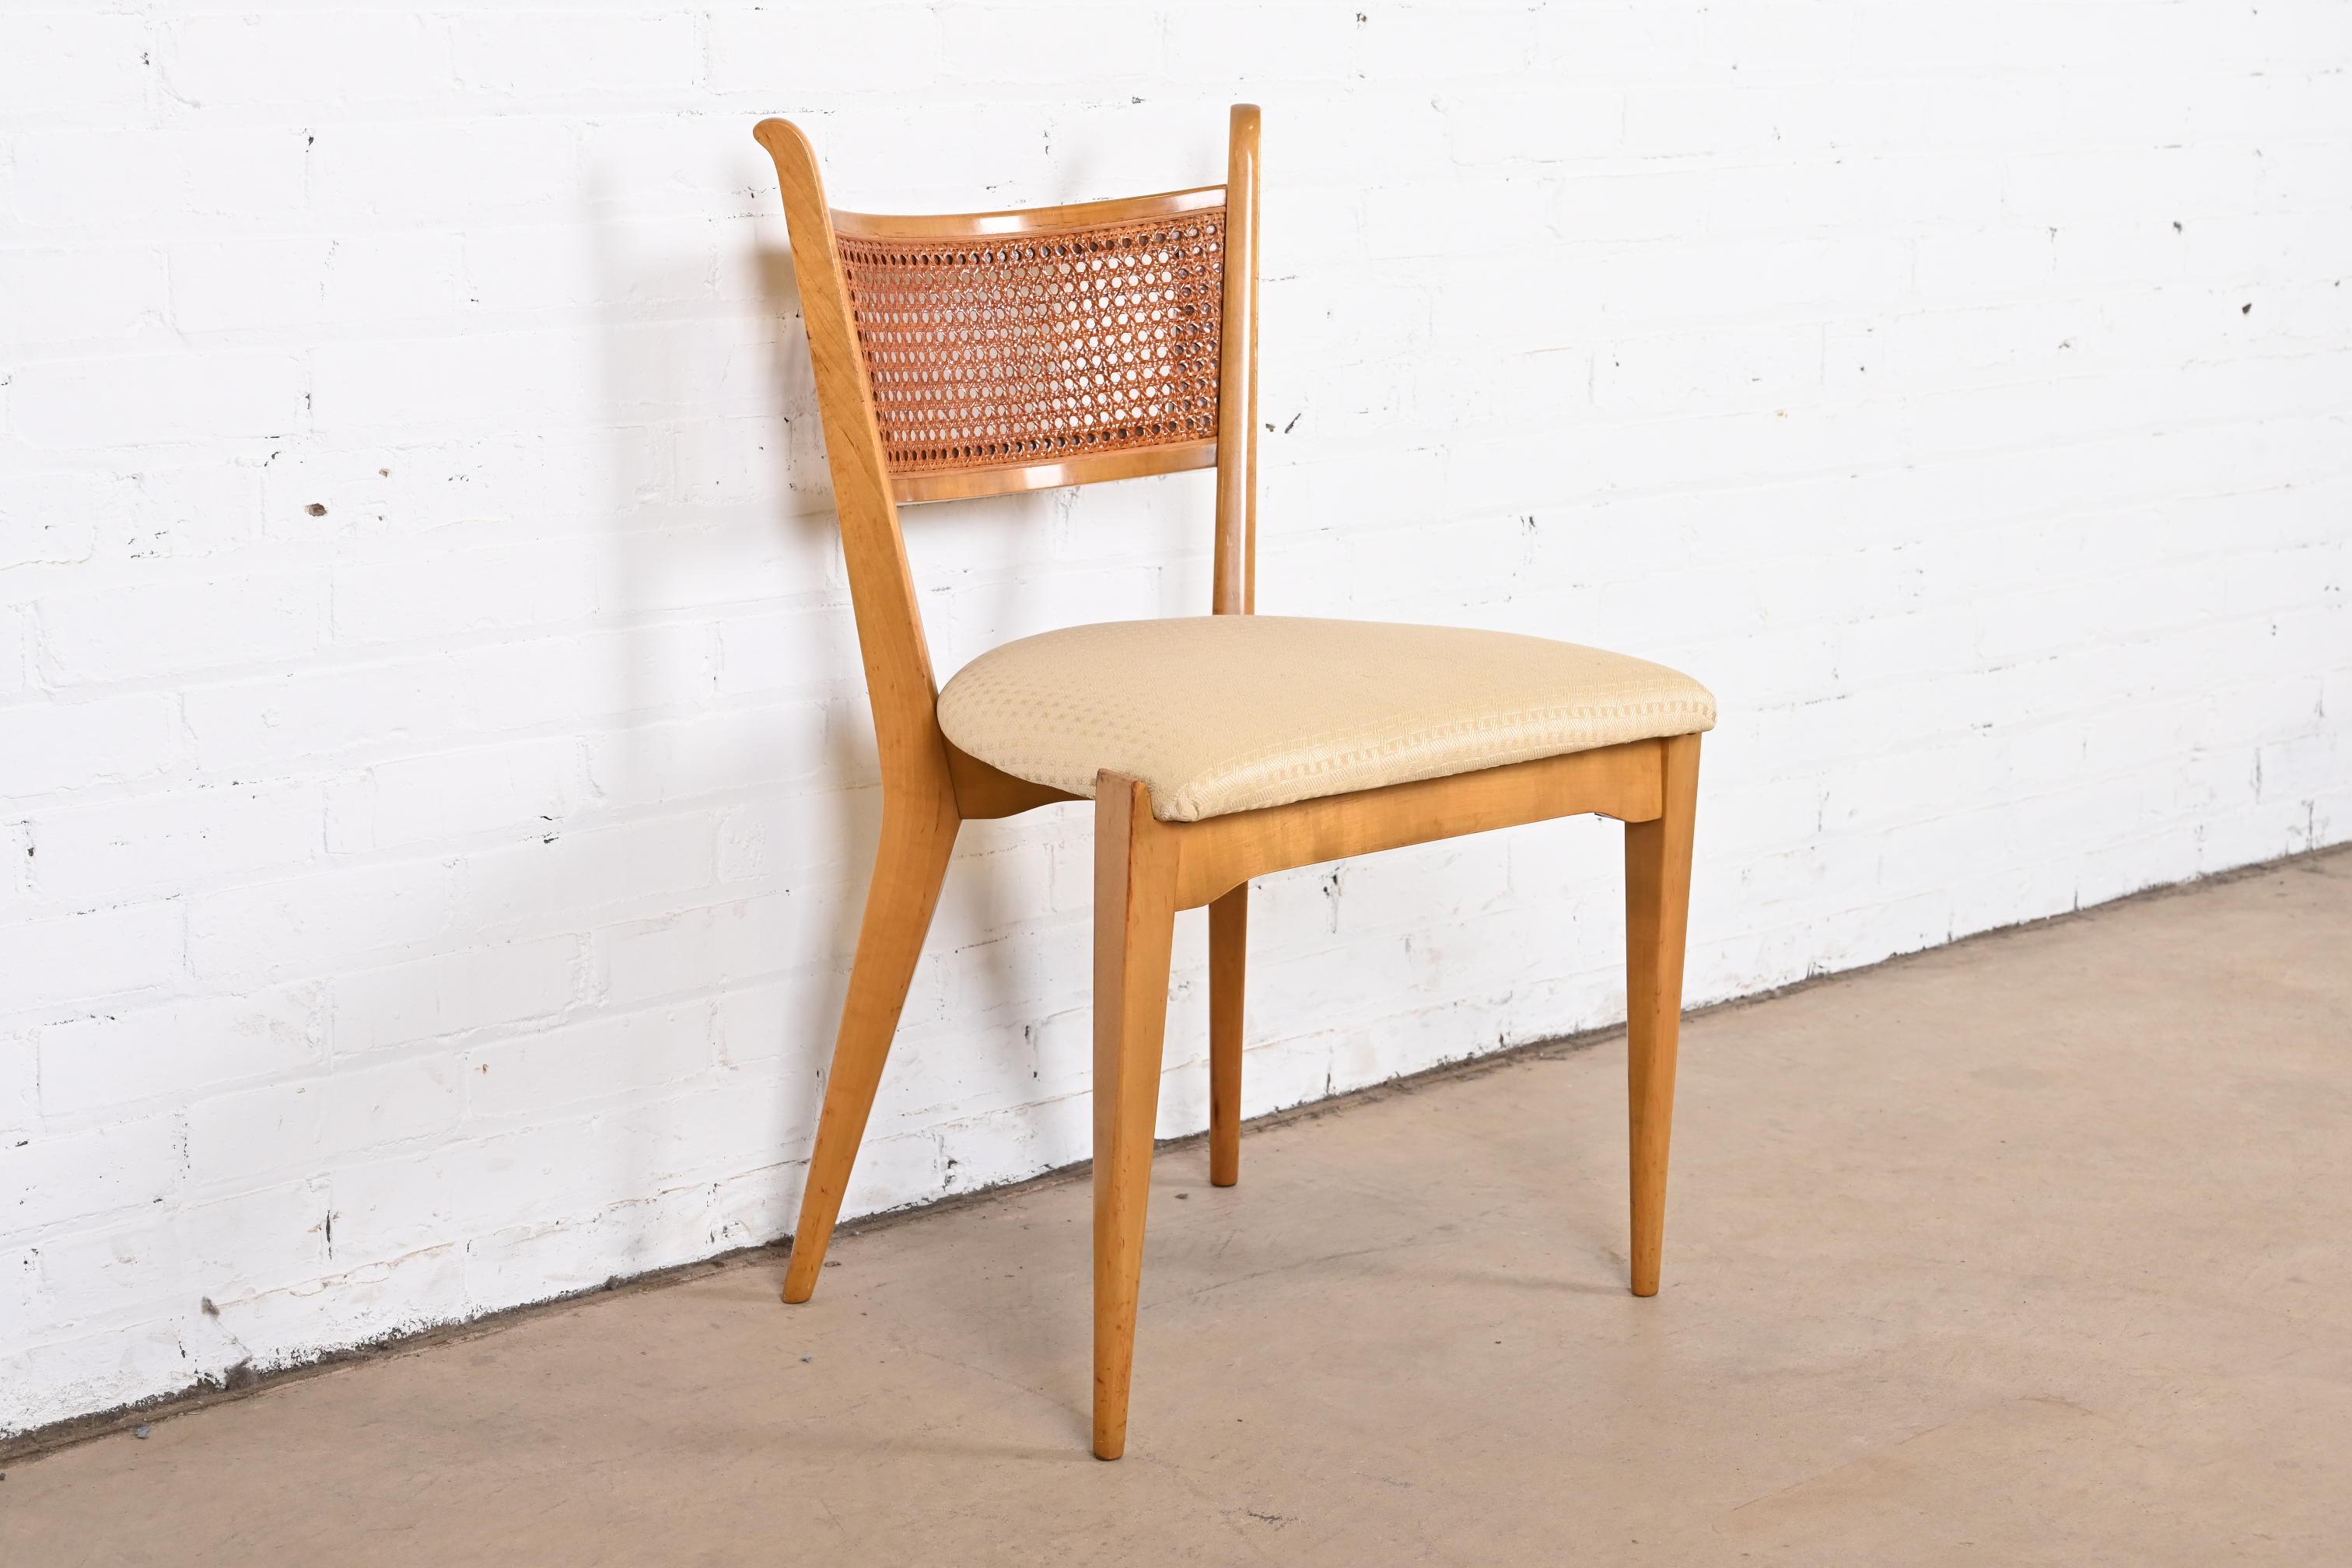 Edmond Spence Swedish Modern Sculpted Maple and Cane Dining Chairs, Set of Four For Sale 7